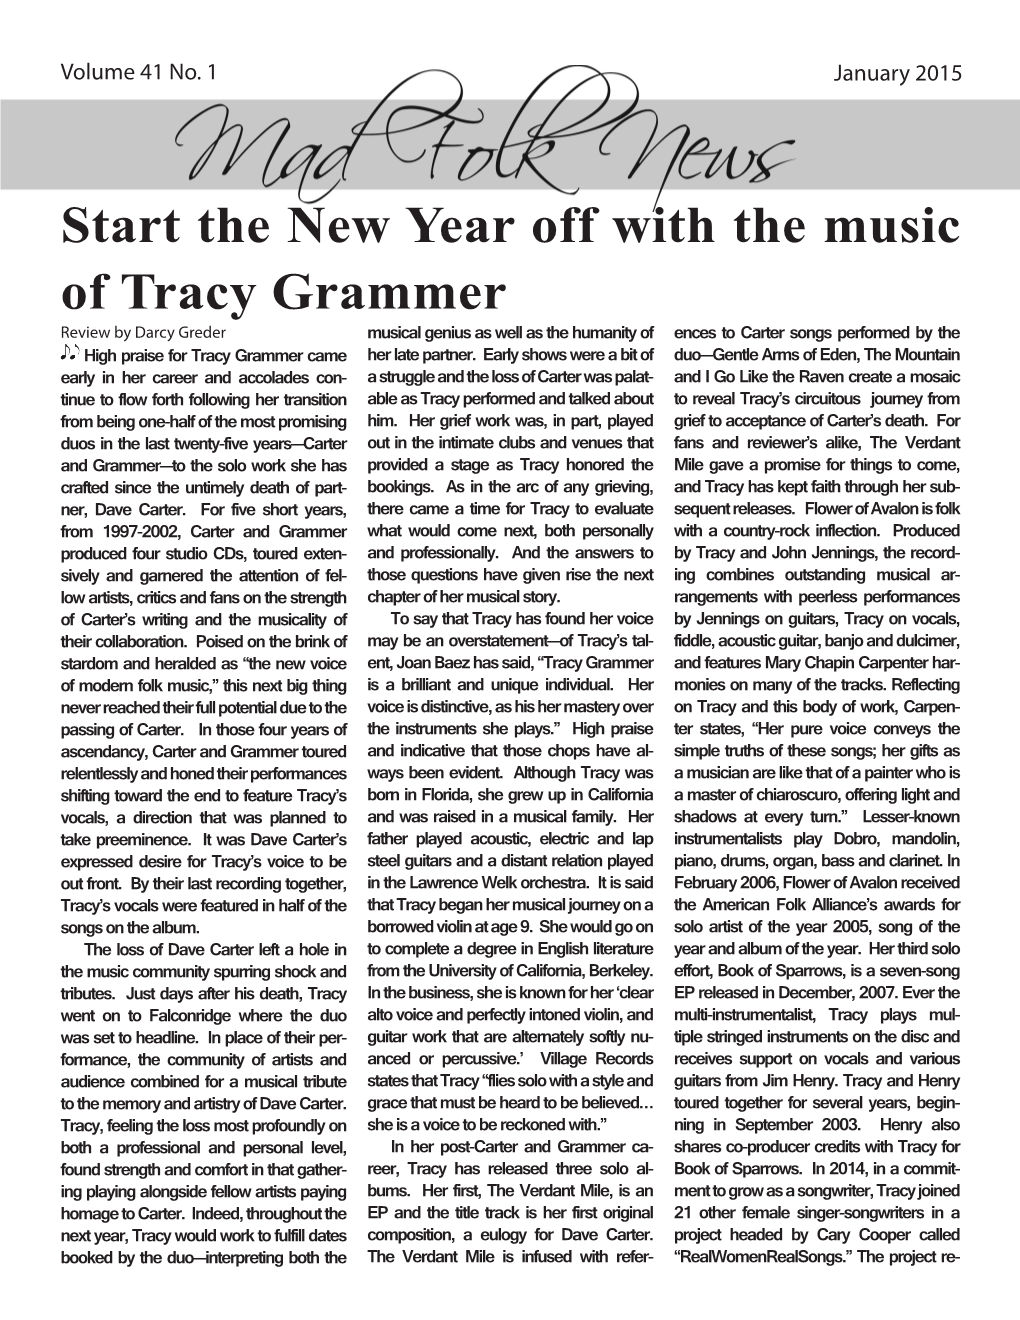 The New Year Off with the Music of Tracy